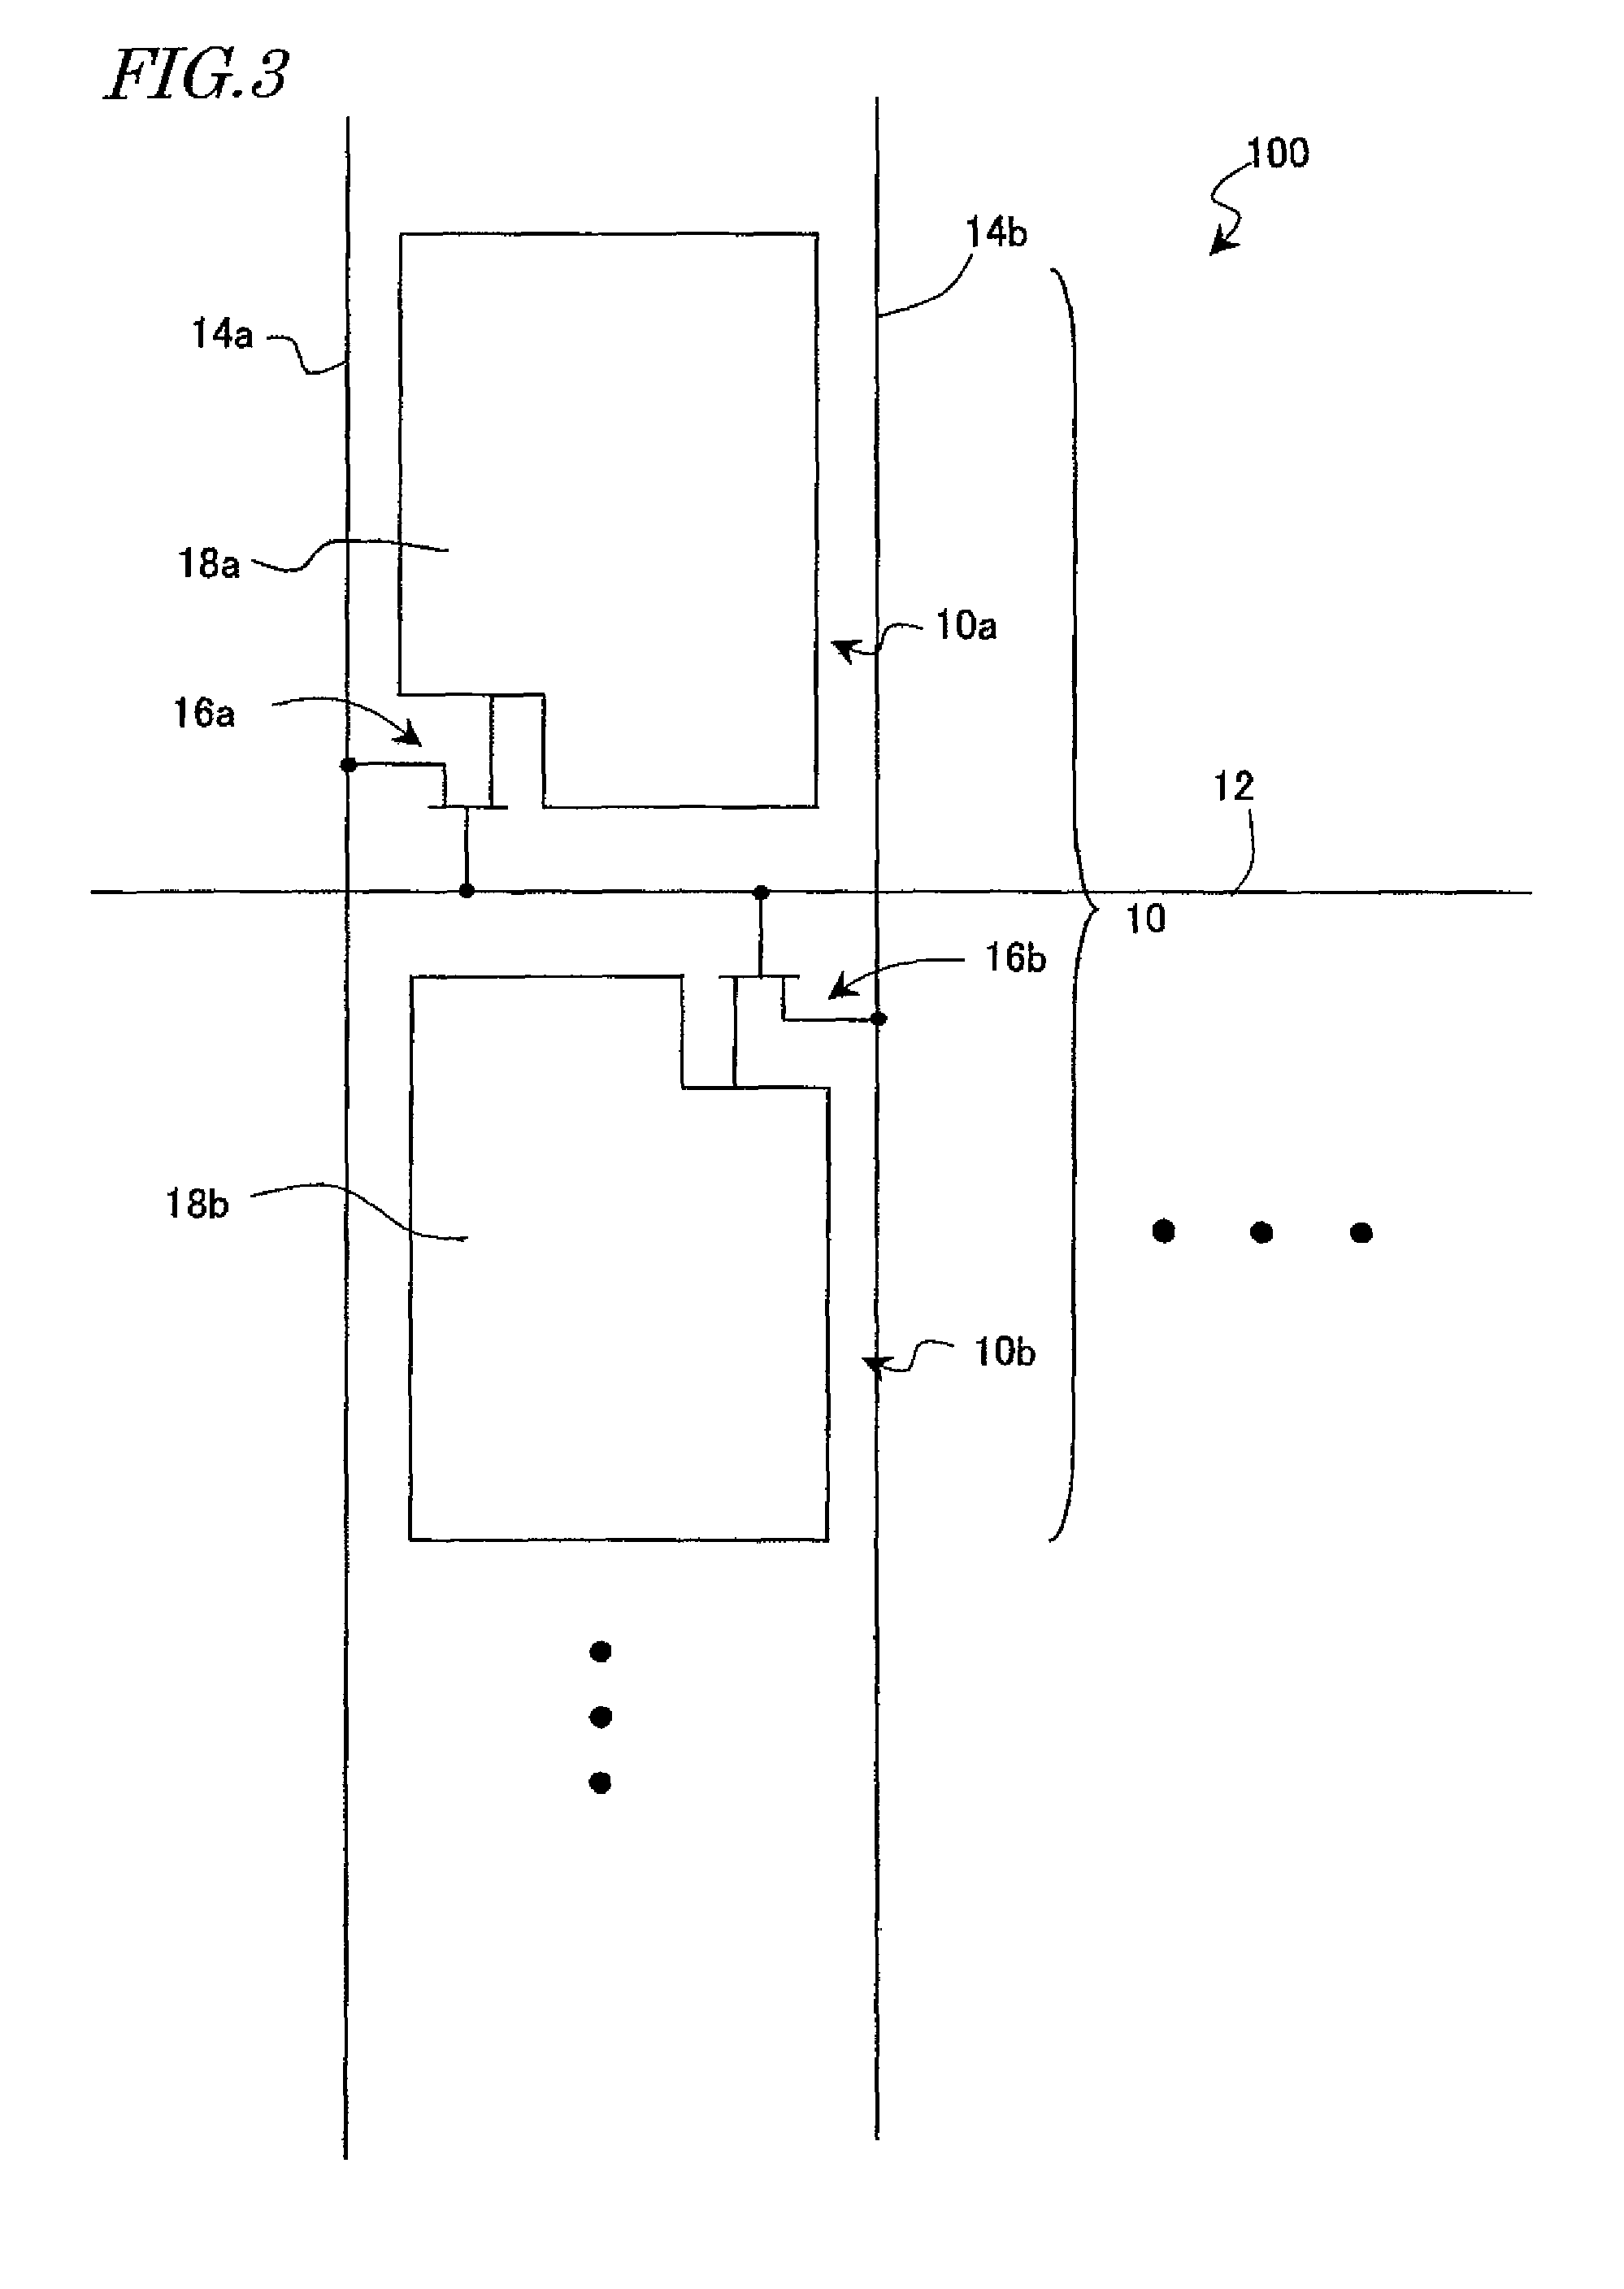 Multiple-primary-color liquid crystal display device